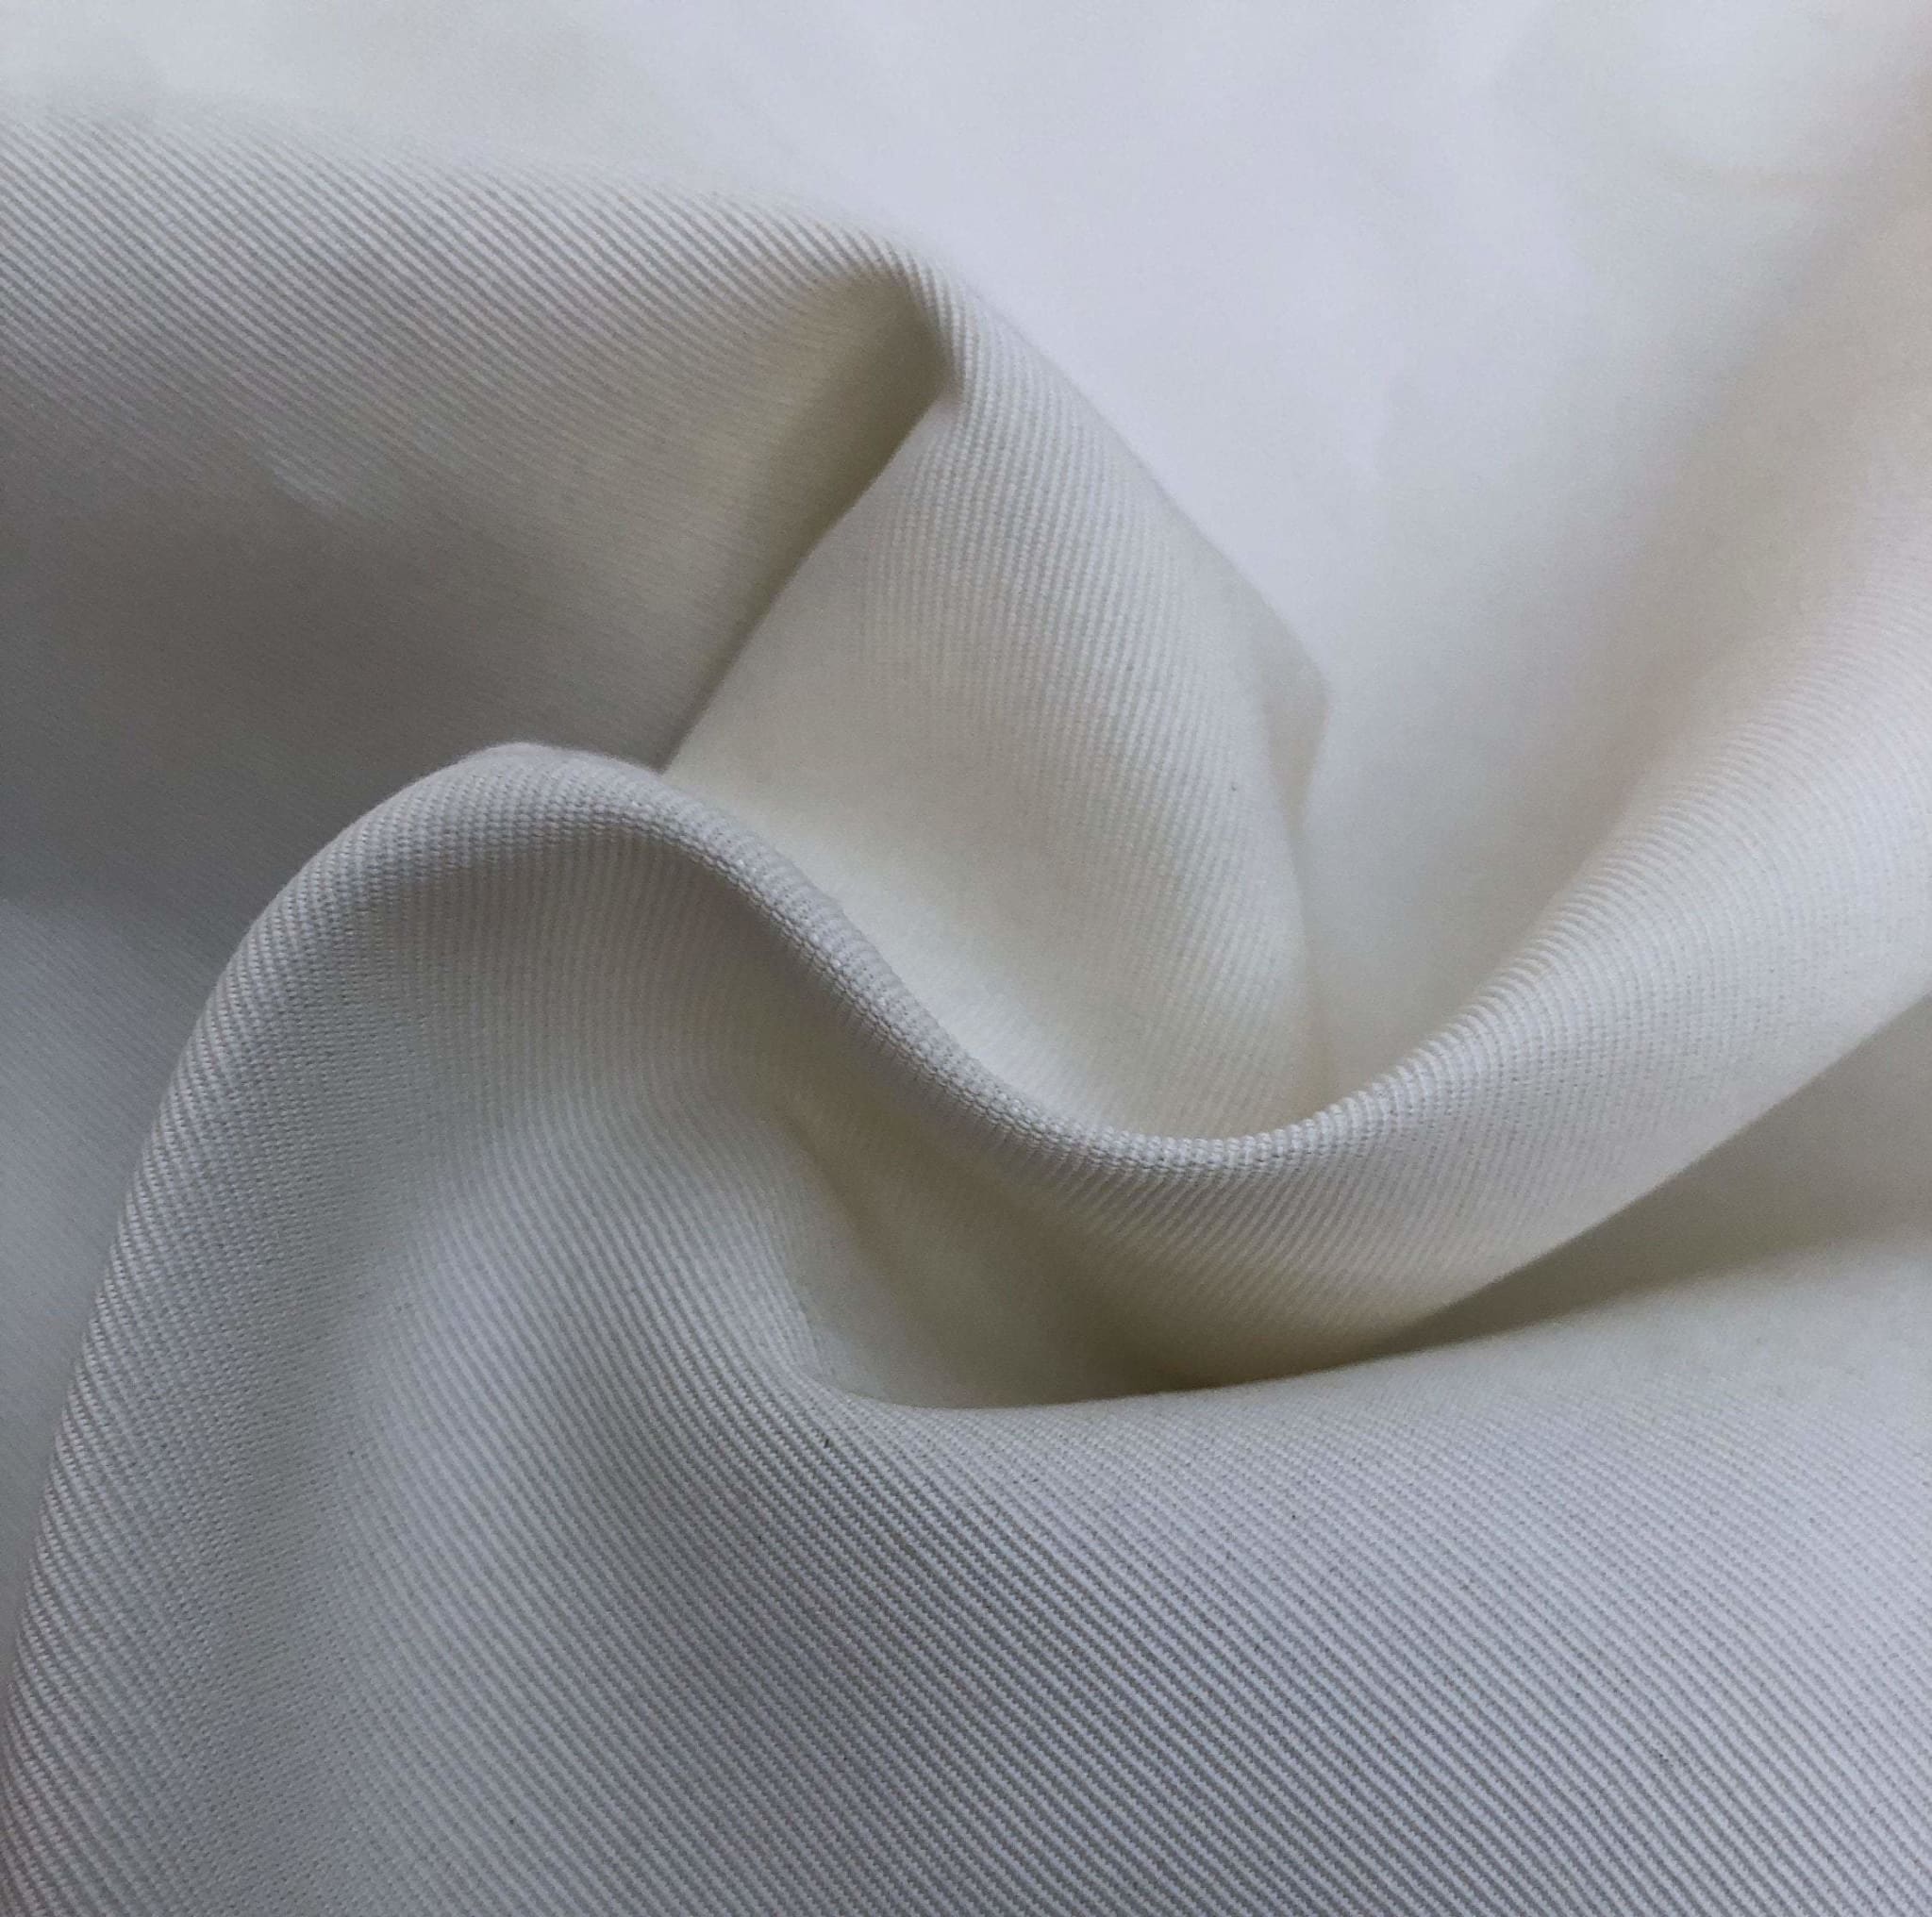 58 PFD White Greige Goods 100% Rayon Faille Ghost Woven Fabric By the Yard